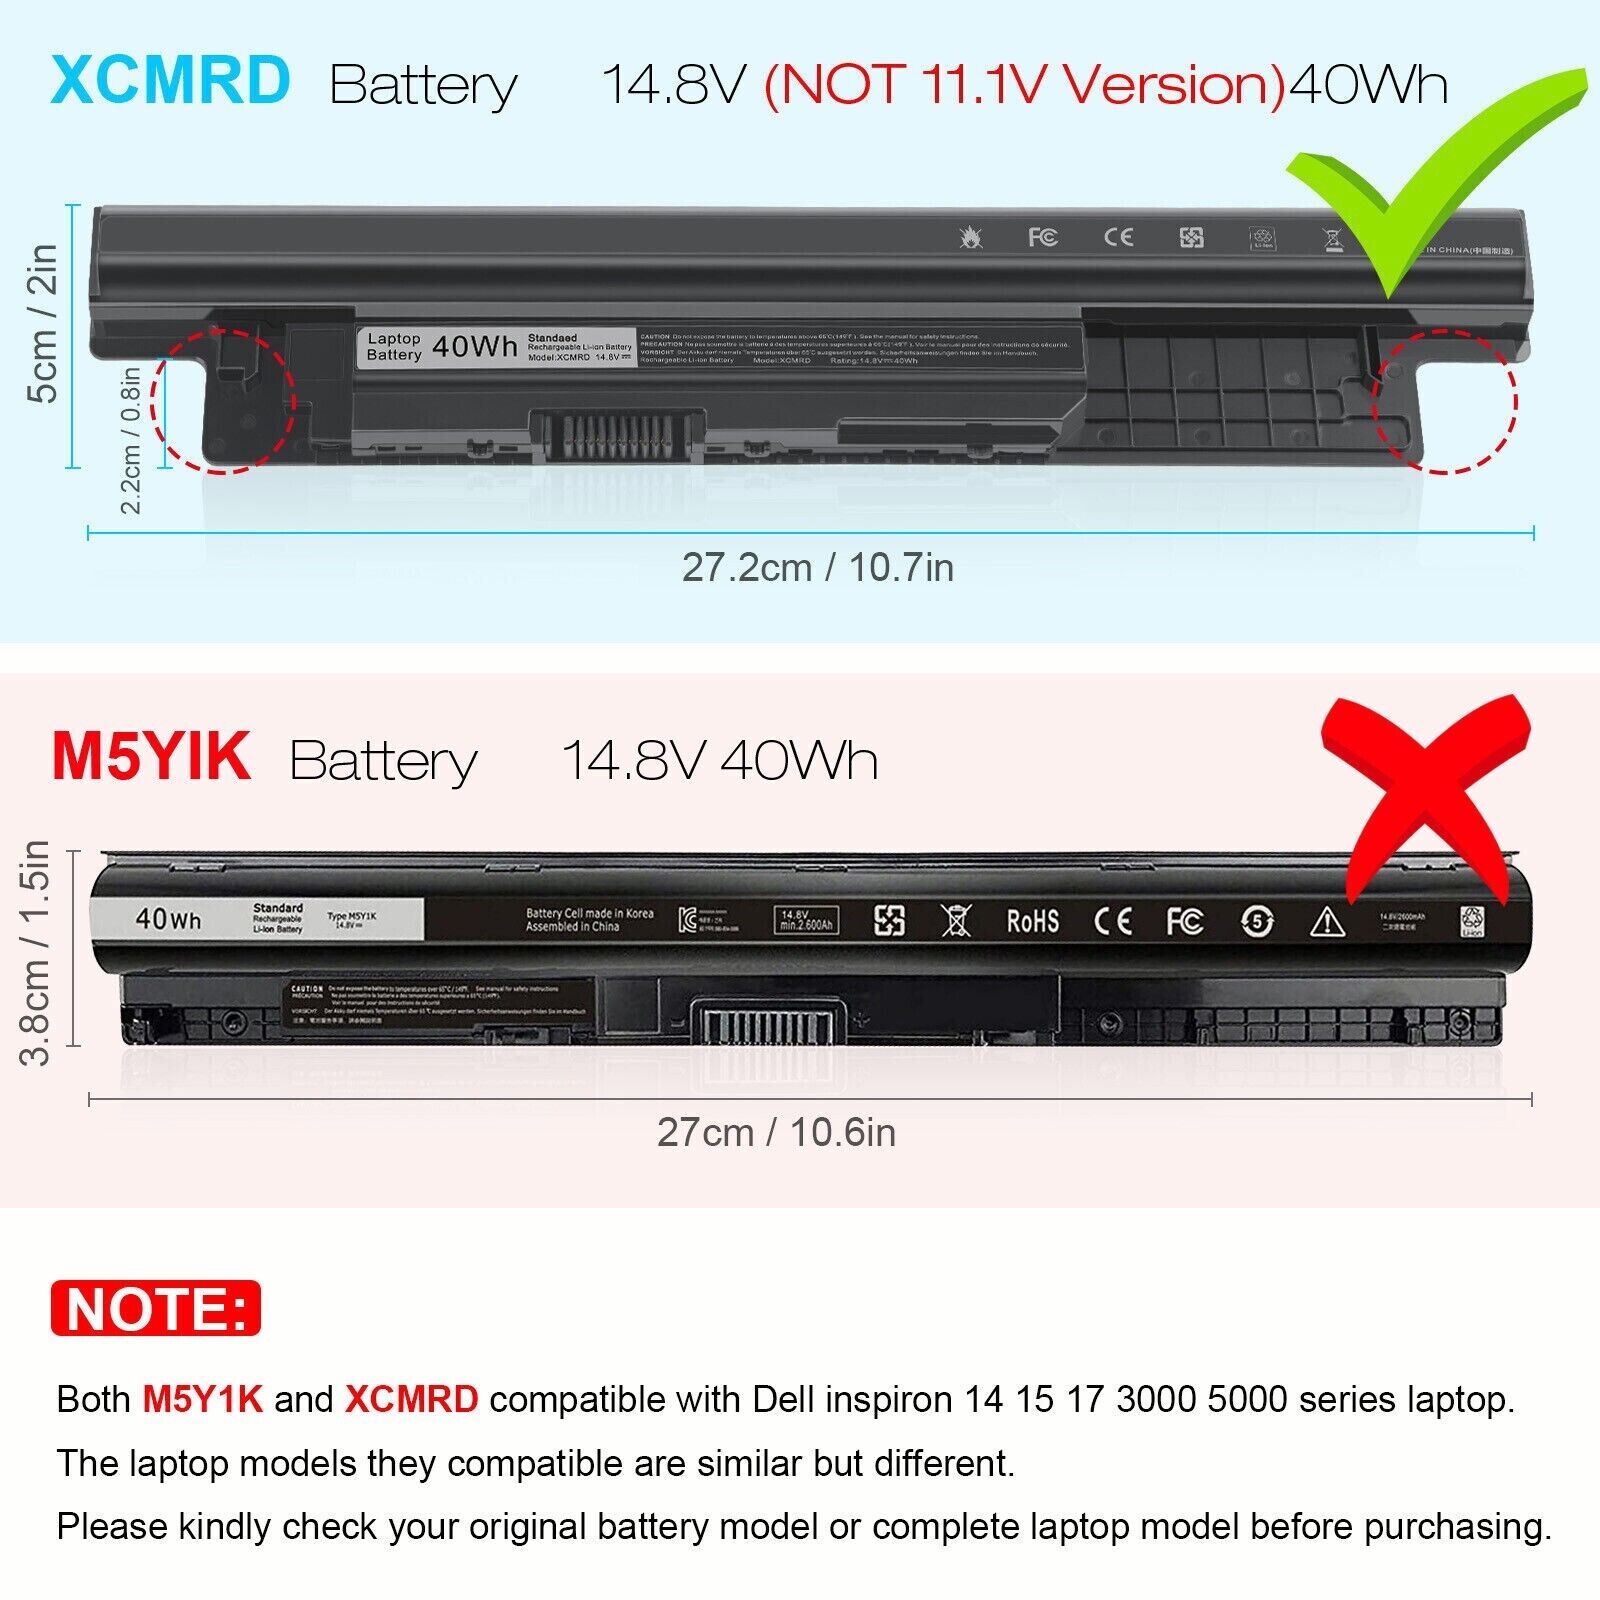 MR90Y XCMRD Battery For Dell Inspiron 17R 5737 5721 17 5748 3721 15R 5537 5521